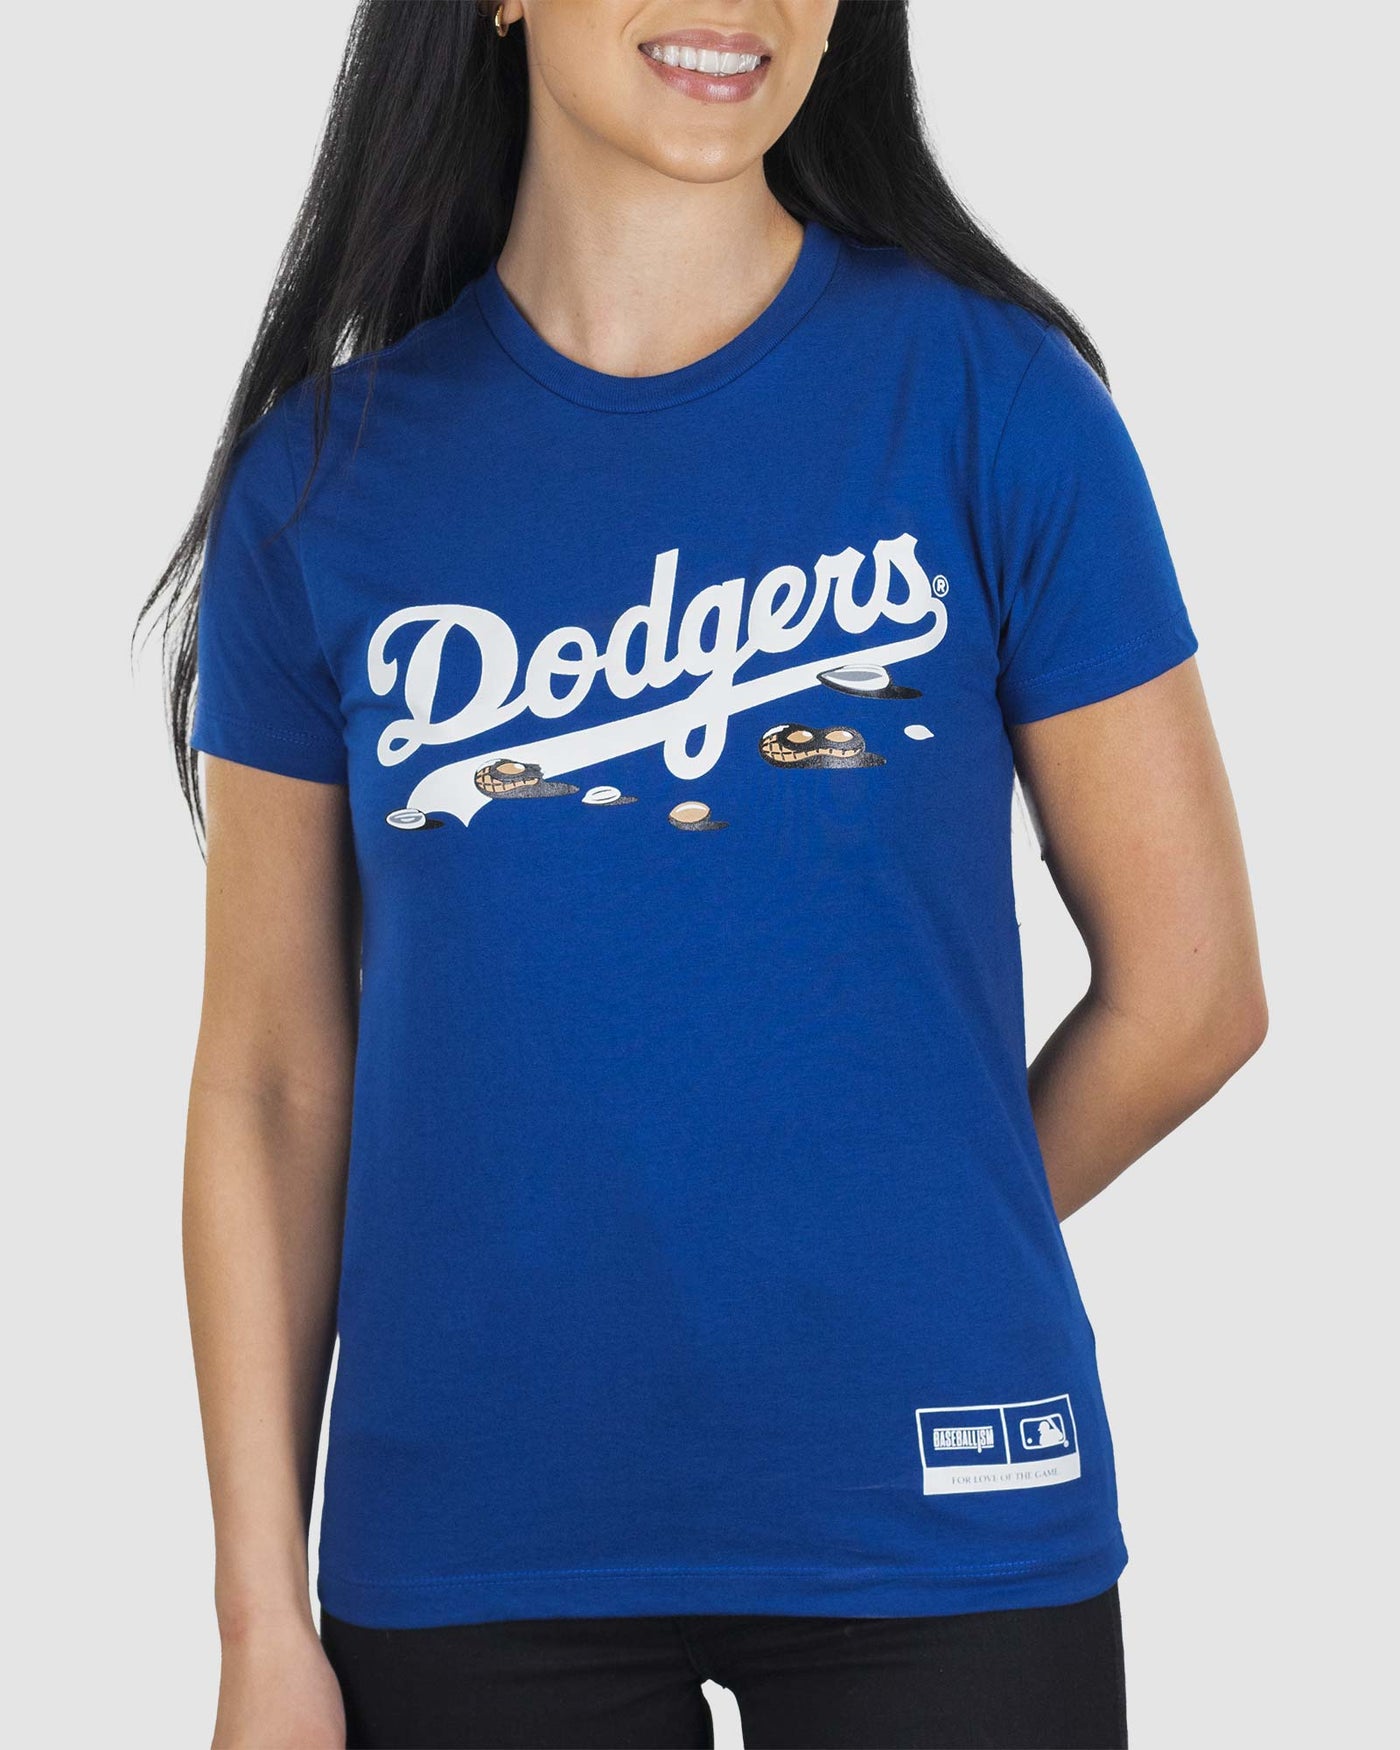 AVAILABLE Snoopy Los Angeles Dodgers Baseball Jersey 14